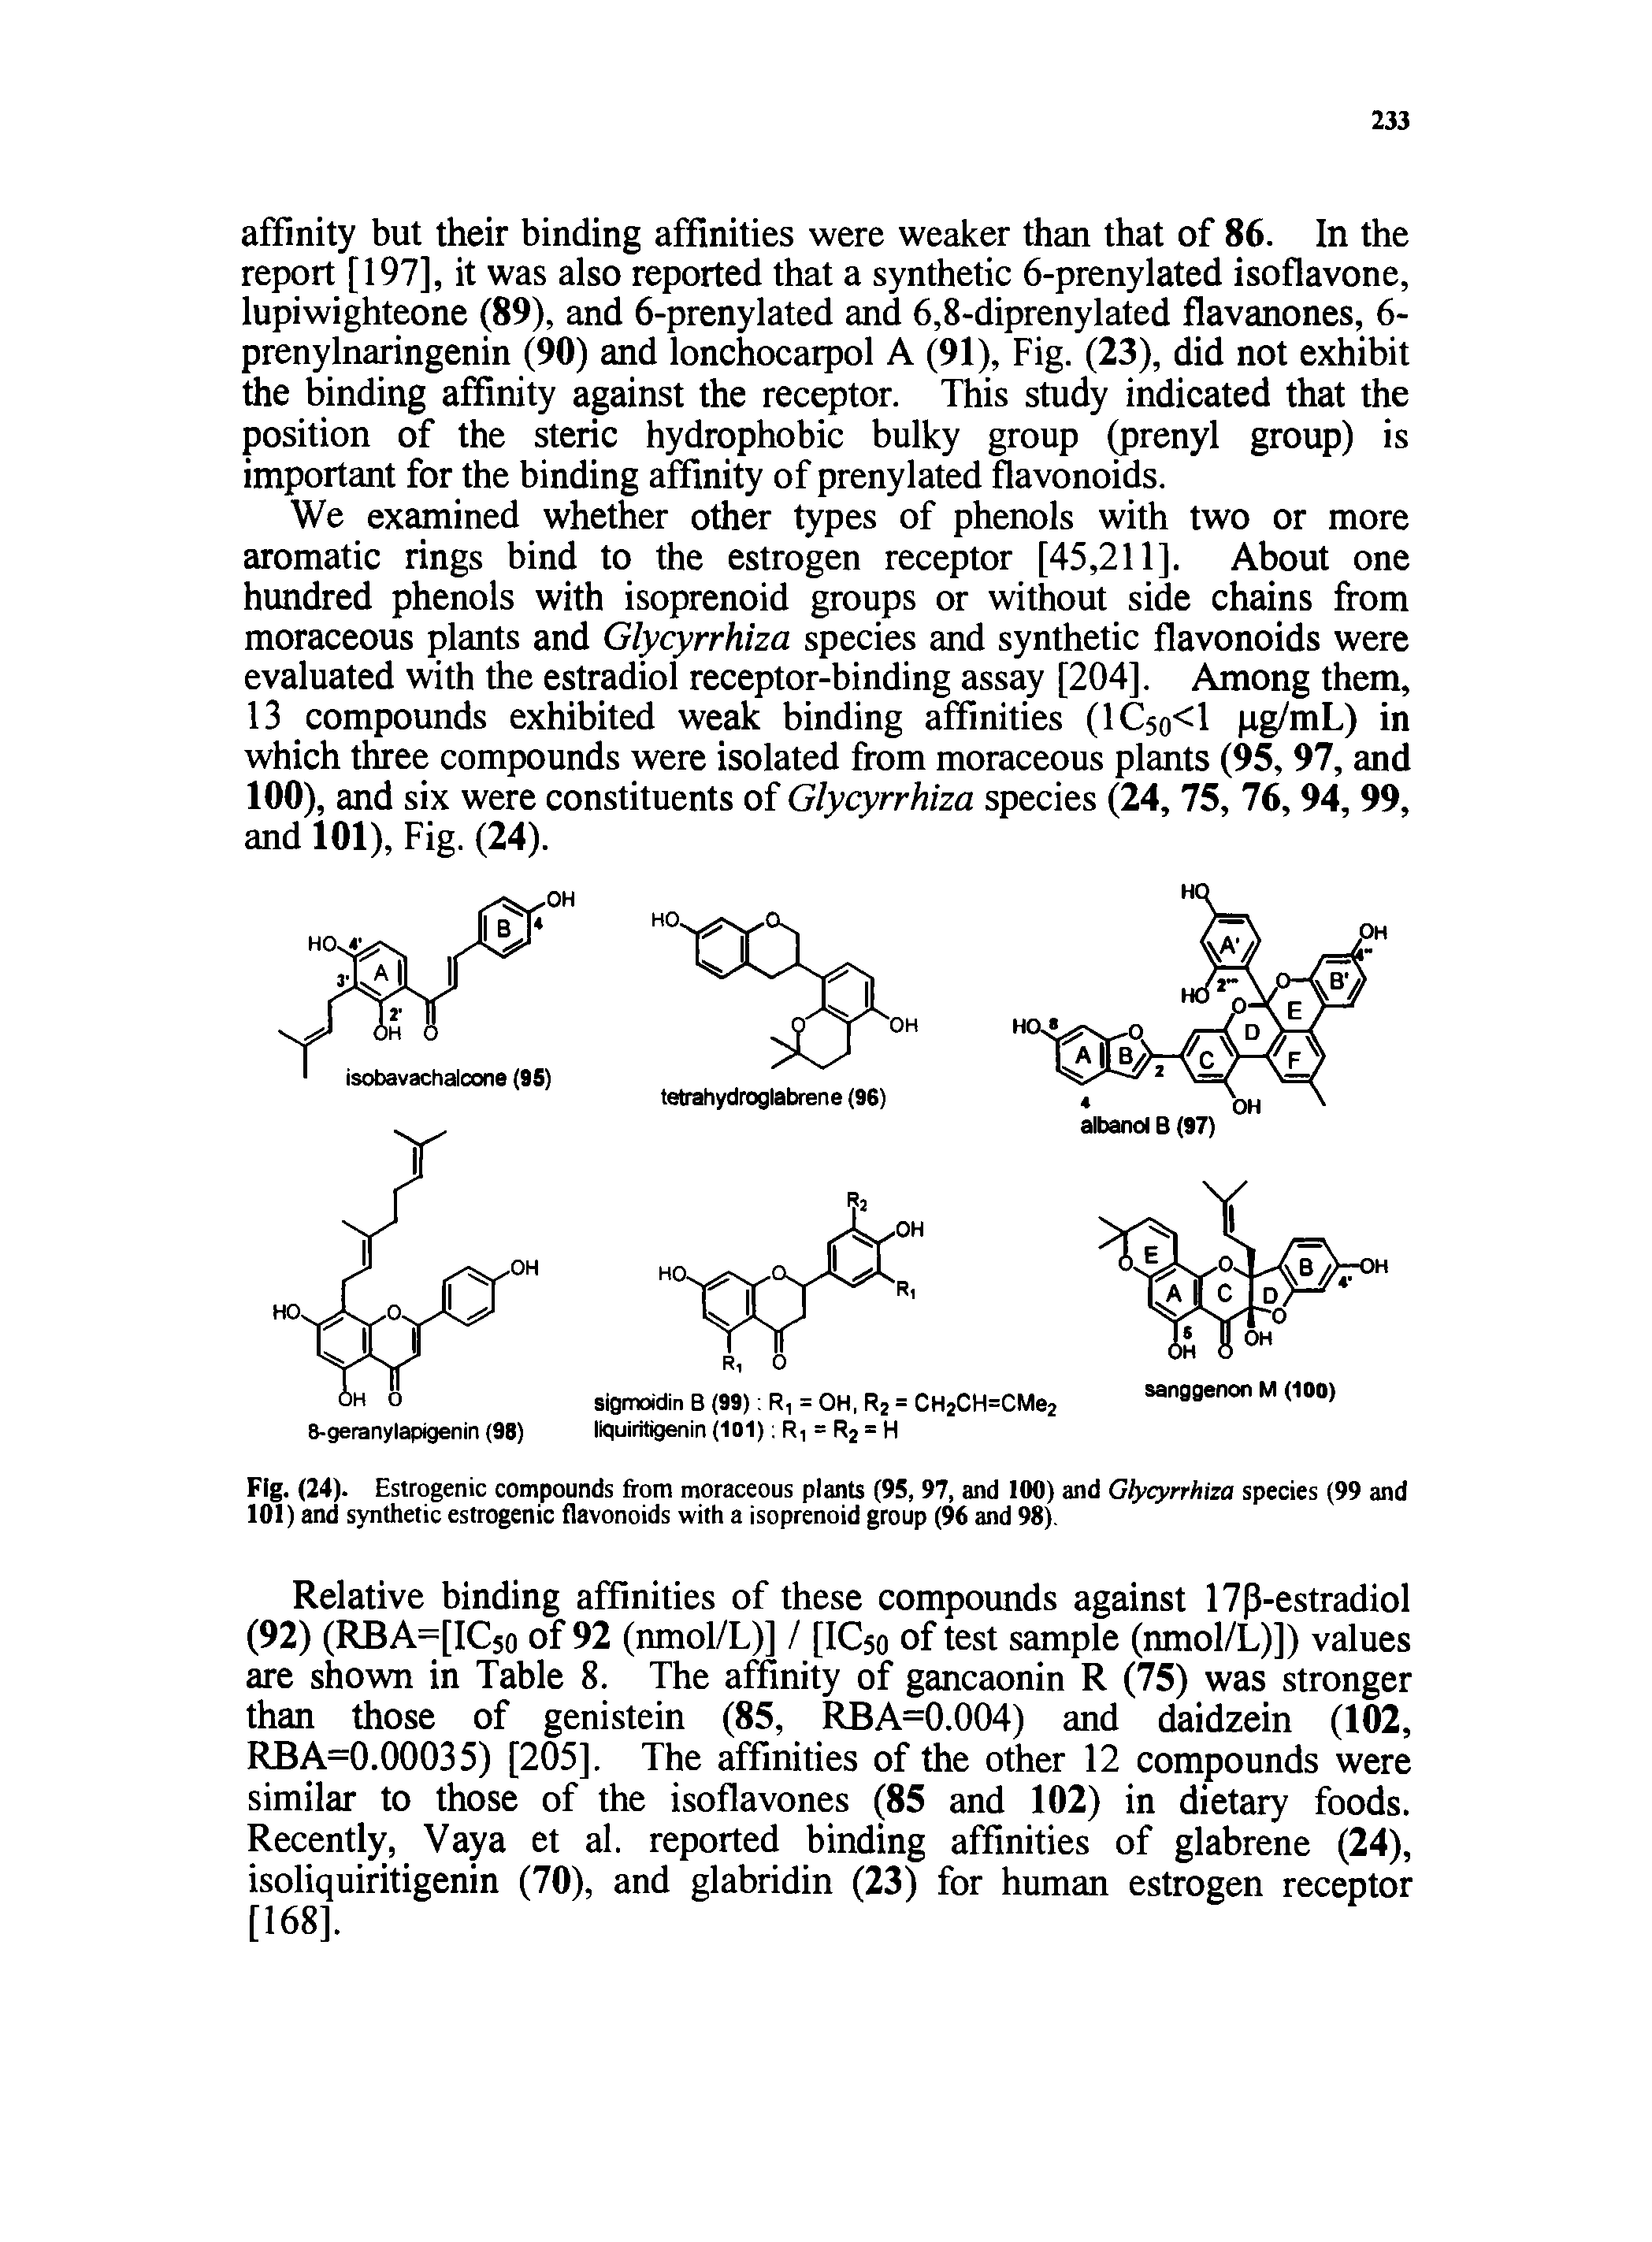 Fig. (24). Estrogenic compounds from moraceous plants (95, 97, and 100) and Glycyrrhiza species (99 and 101) and synthetic estrogenic flavonoids with a isoprenoid group (96 and 98).